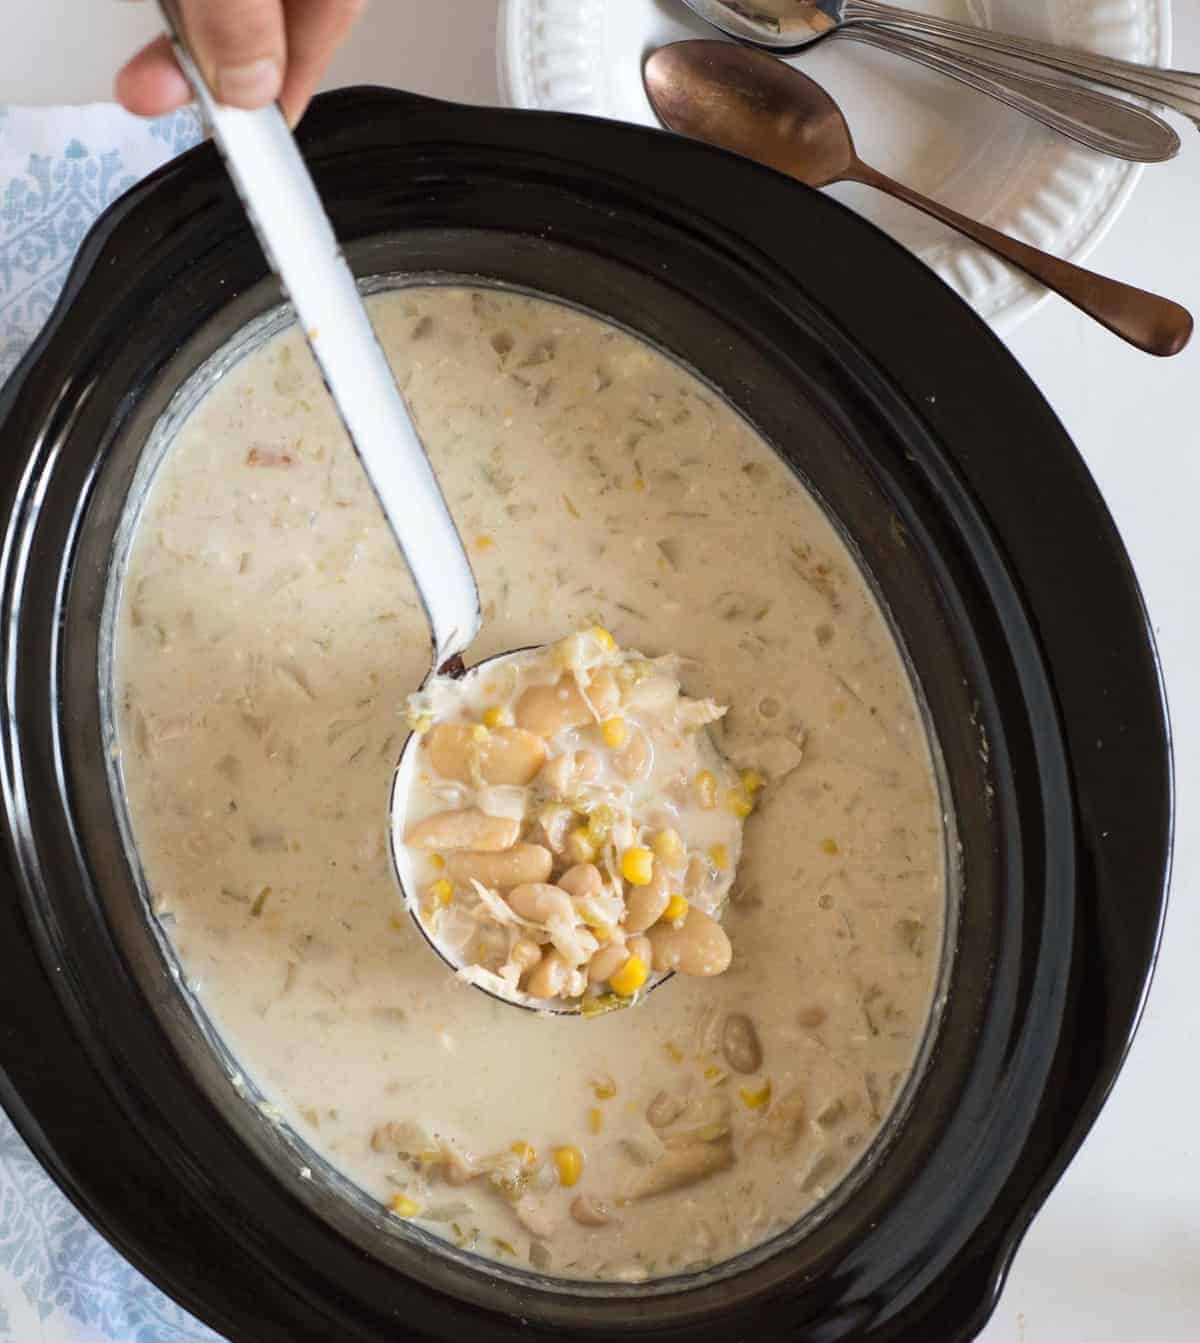 The best creamy slow cooker white chicken chili on the block. This recipes is super easy to make, cooks by itself, and is a chili cook off winning recipe.